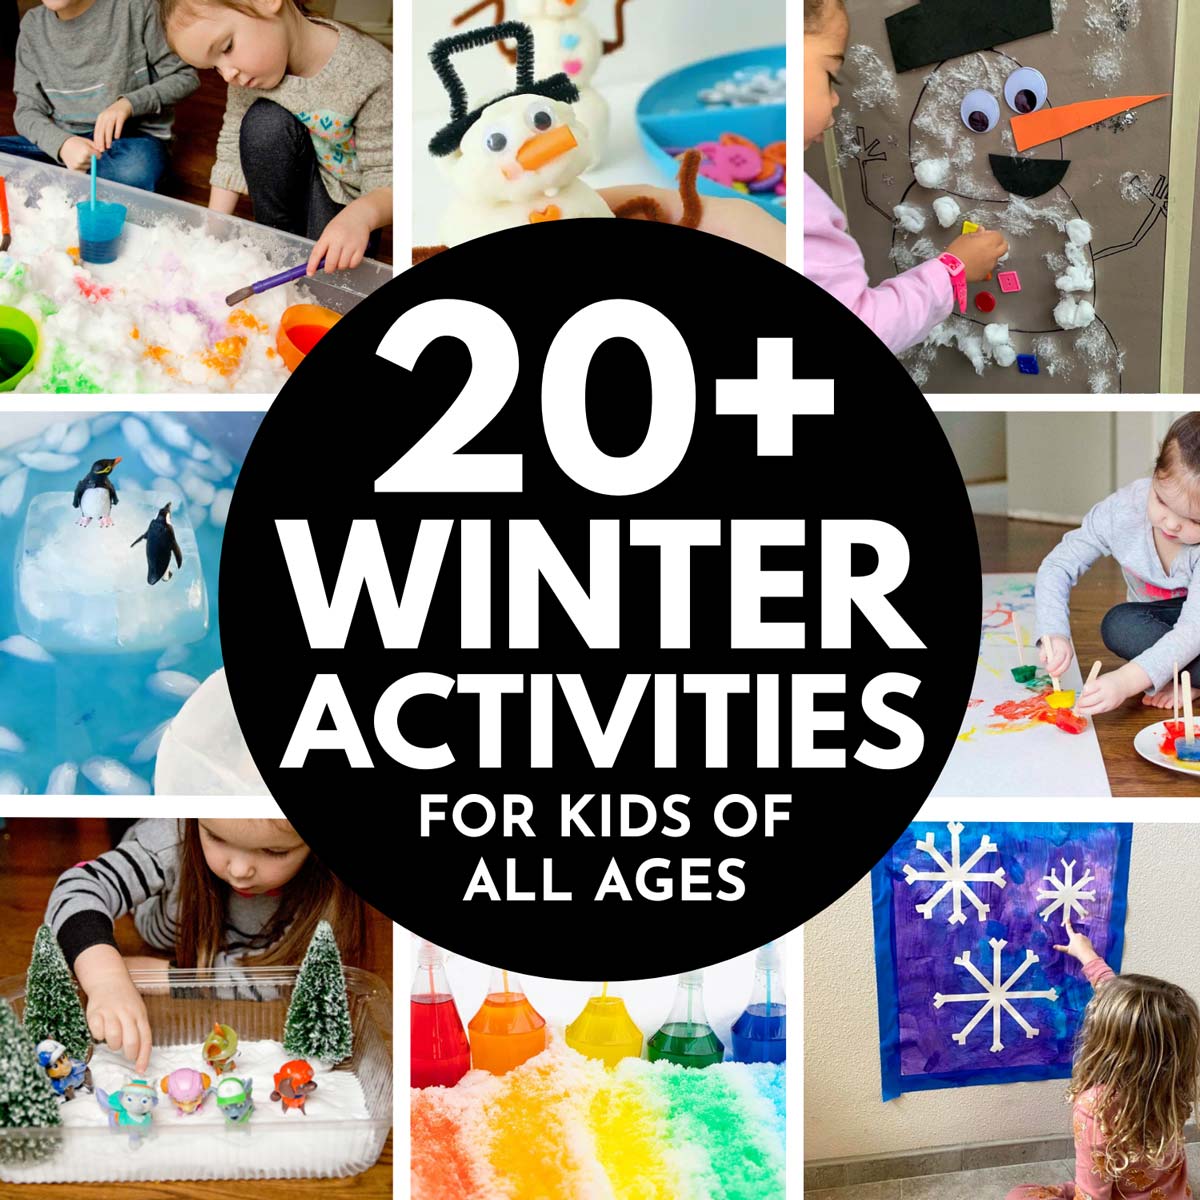 20+ Winter Activities for Kids of All Ages: image shows 8 winter ideas for kids.